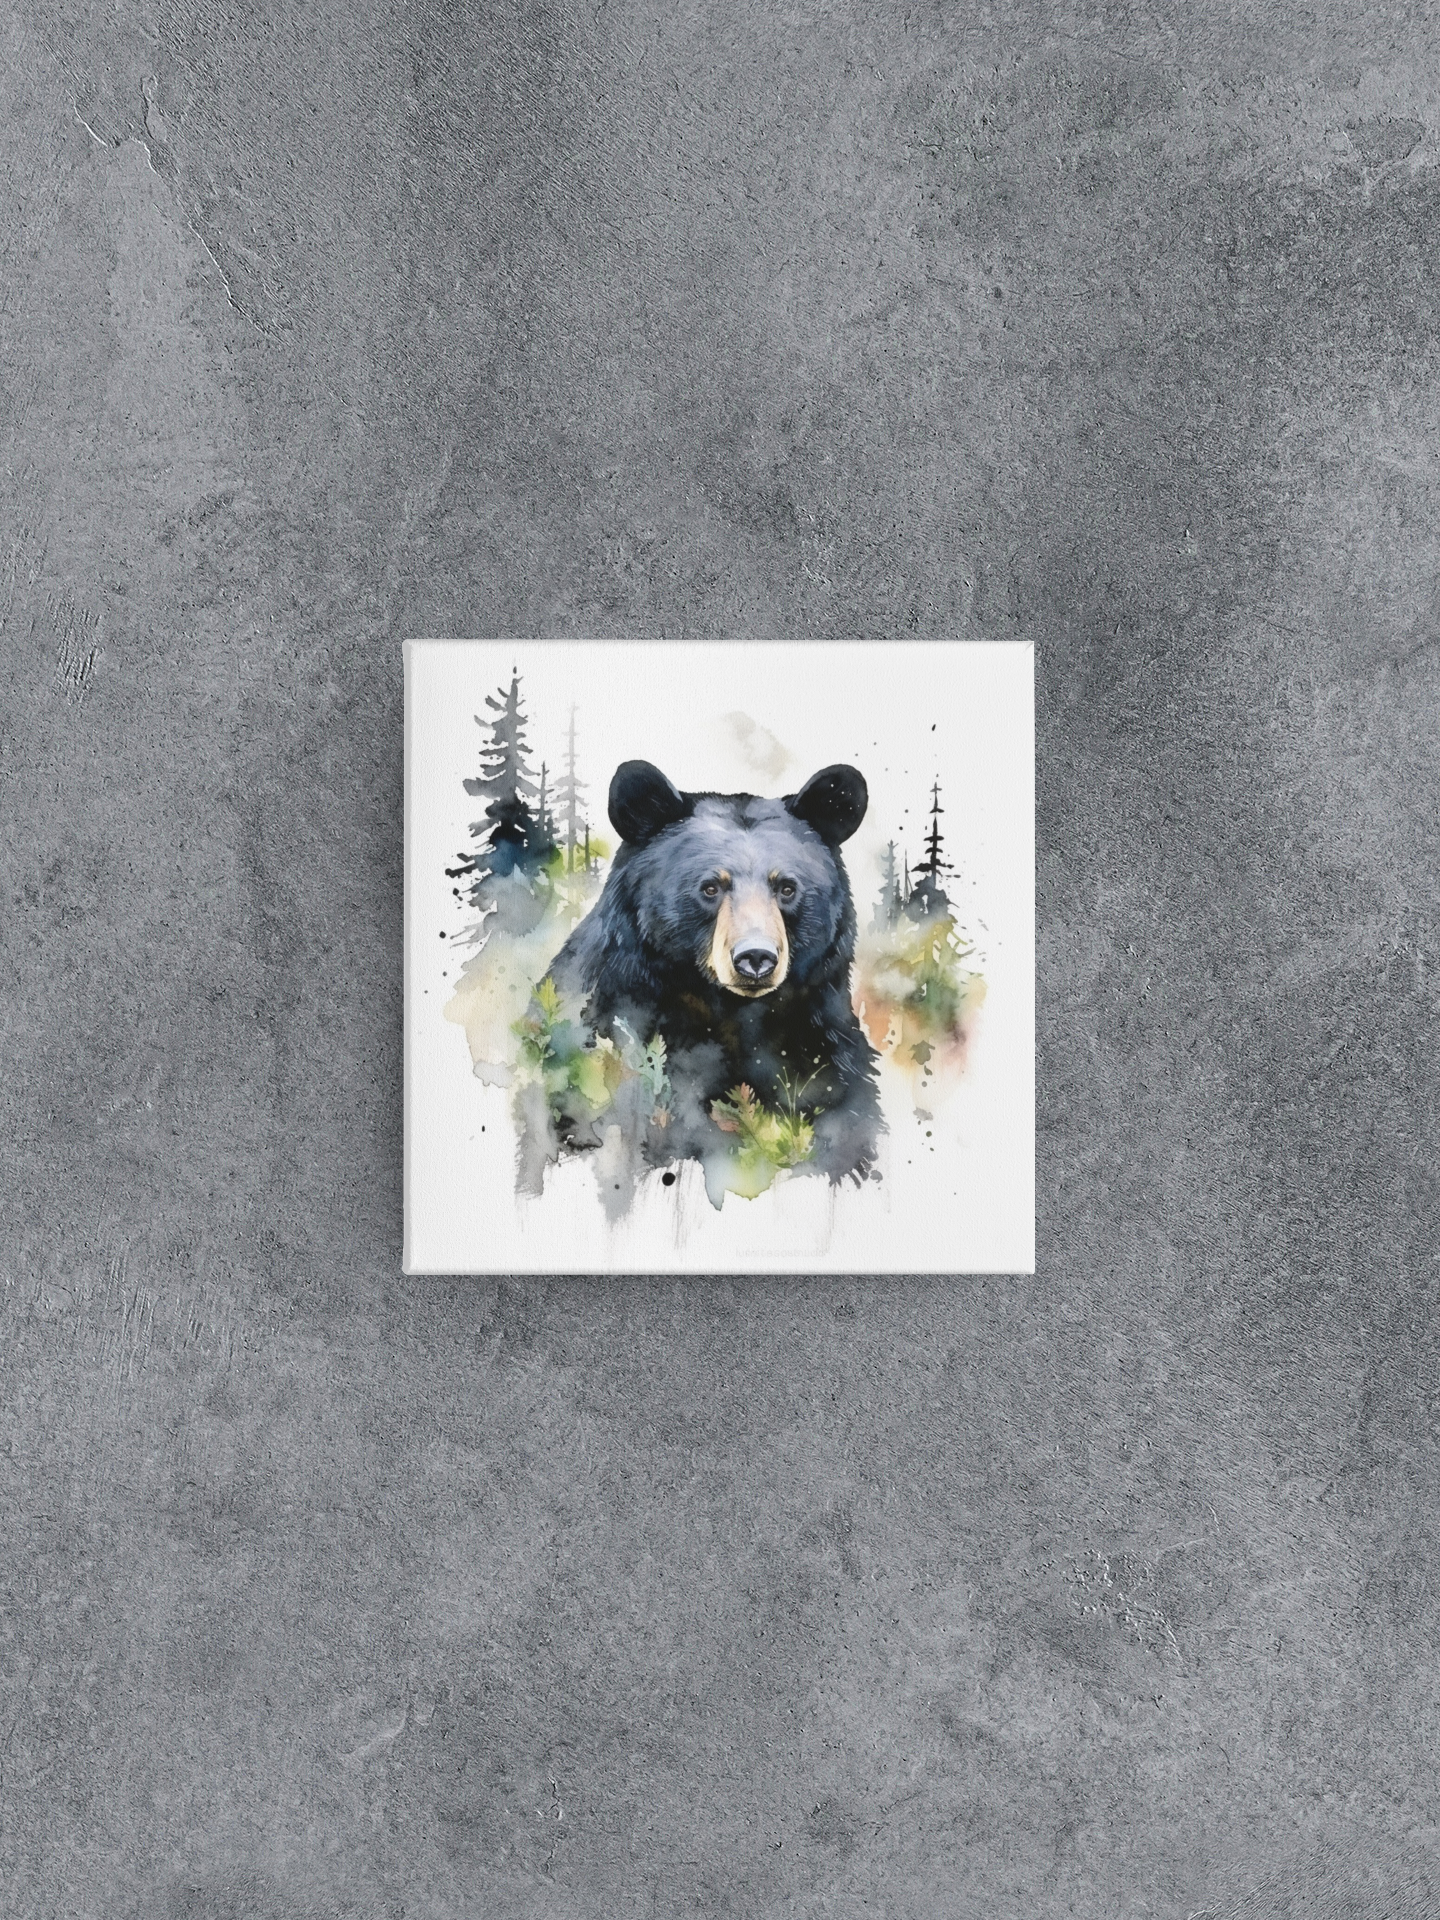 Maine Black Bear Canvas Wall Art, Watercolor Black Bear Painting, Nature Canvas Art, Bear Lover Gift, Ready to Hang, Stretched Canvas Art